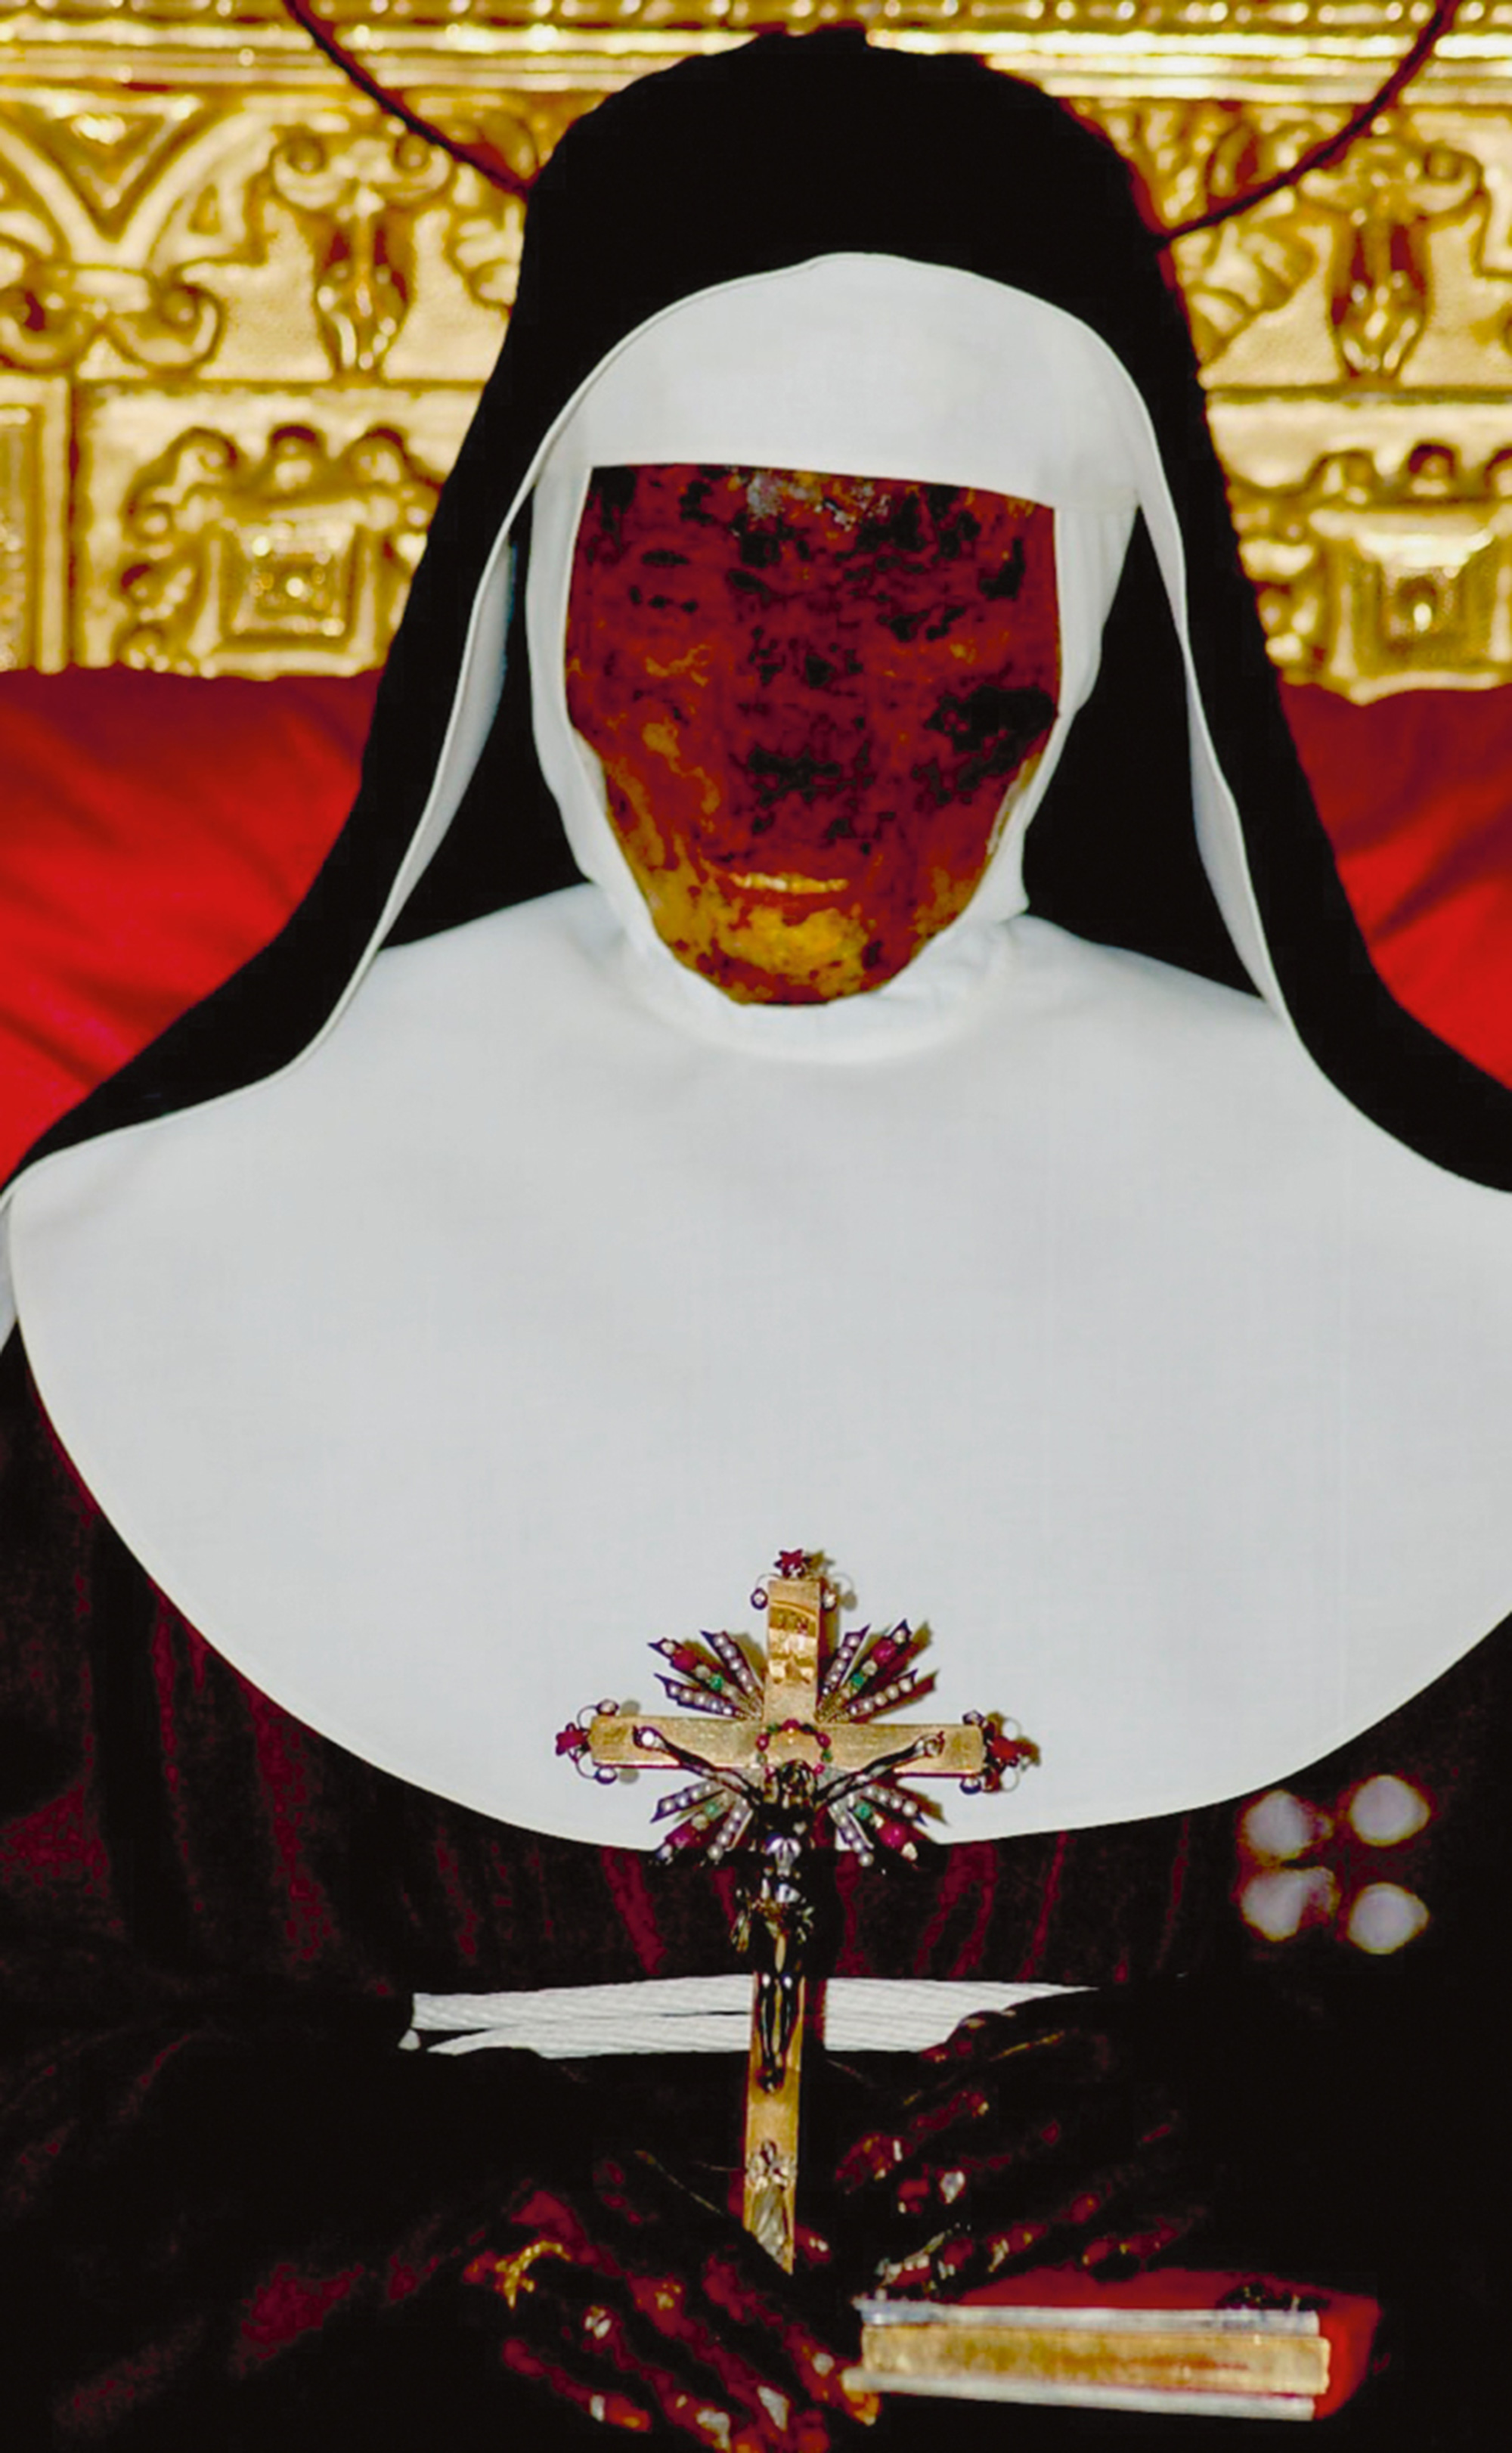 A photograph of the exhumed remains of Saint Catherine of Bologna, occupying her perch at the Convent of the Poor Clares, Bologna, since the late fifteenth century.